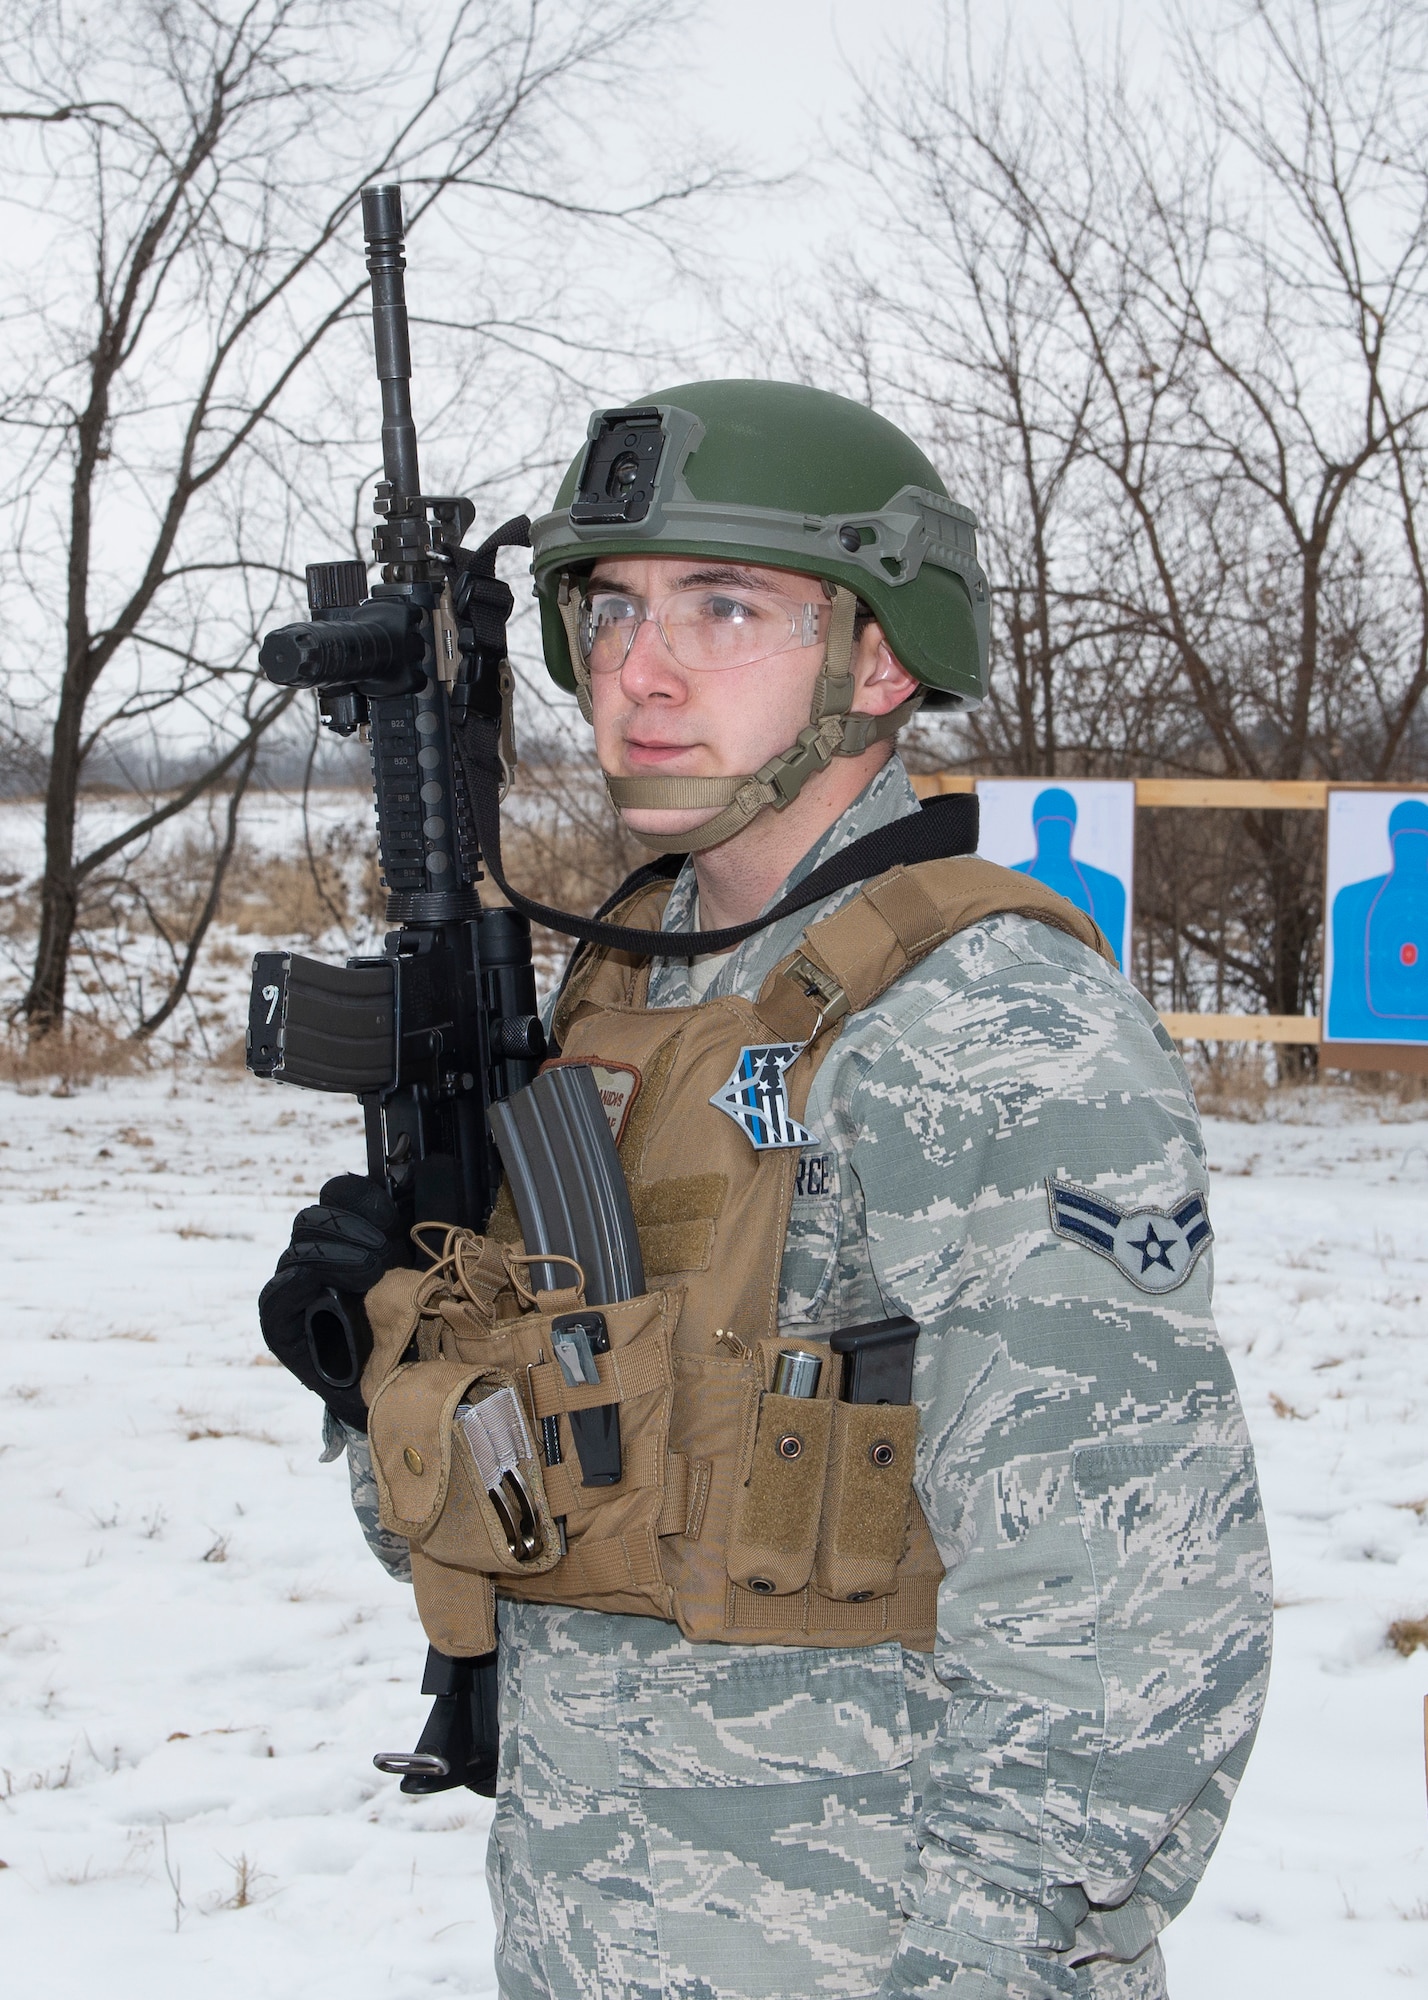 Airman in uniform, wearing protective helmet and standard size tactical vest while holding a weapon in his right hand